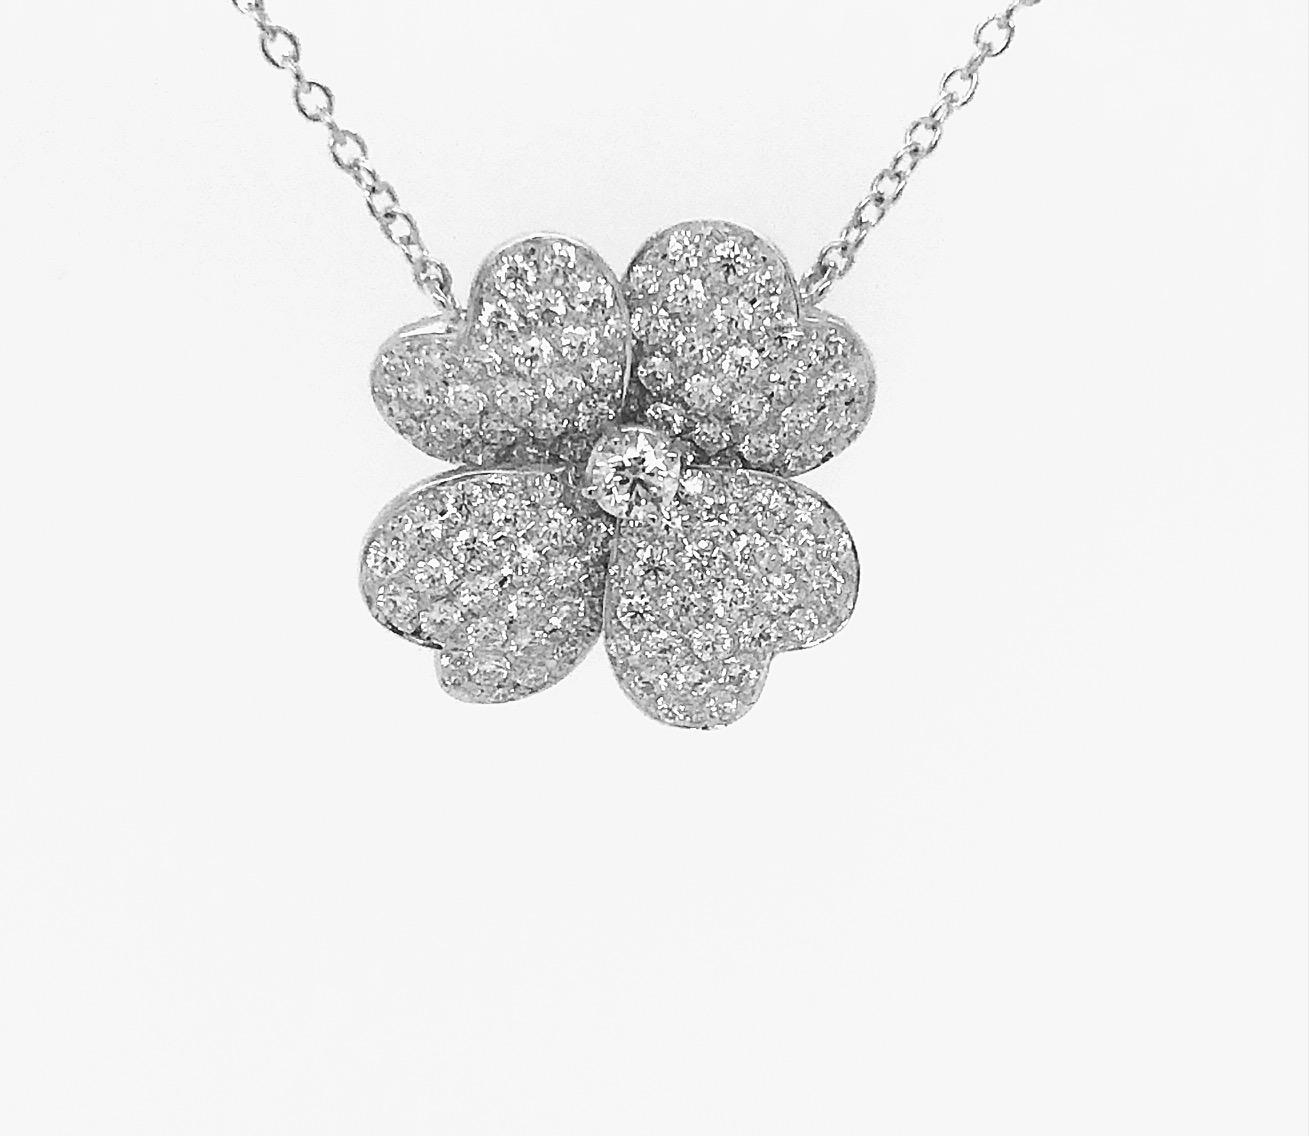 DIAMOND CLOVER NECKLACE 18K WHITE GOLD

Center Stone Total Carat Weight 0.18 carat 

G Color VS1 Clarity

with GIA Certificate #6371025560

Micropave Round Brilliant Diamonds 1.78 carats

D/E Color VVS/VS Clarity

1.96 CTW of all Diamonds

Set in